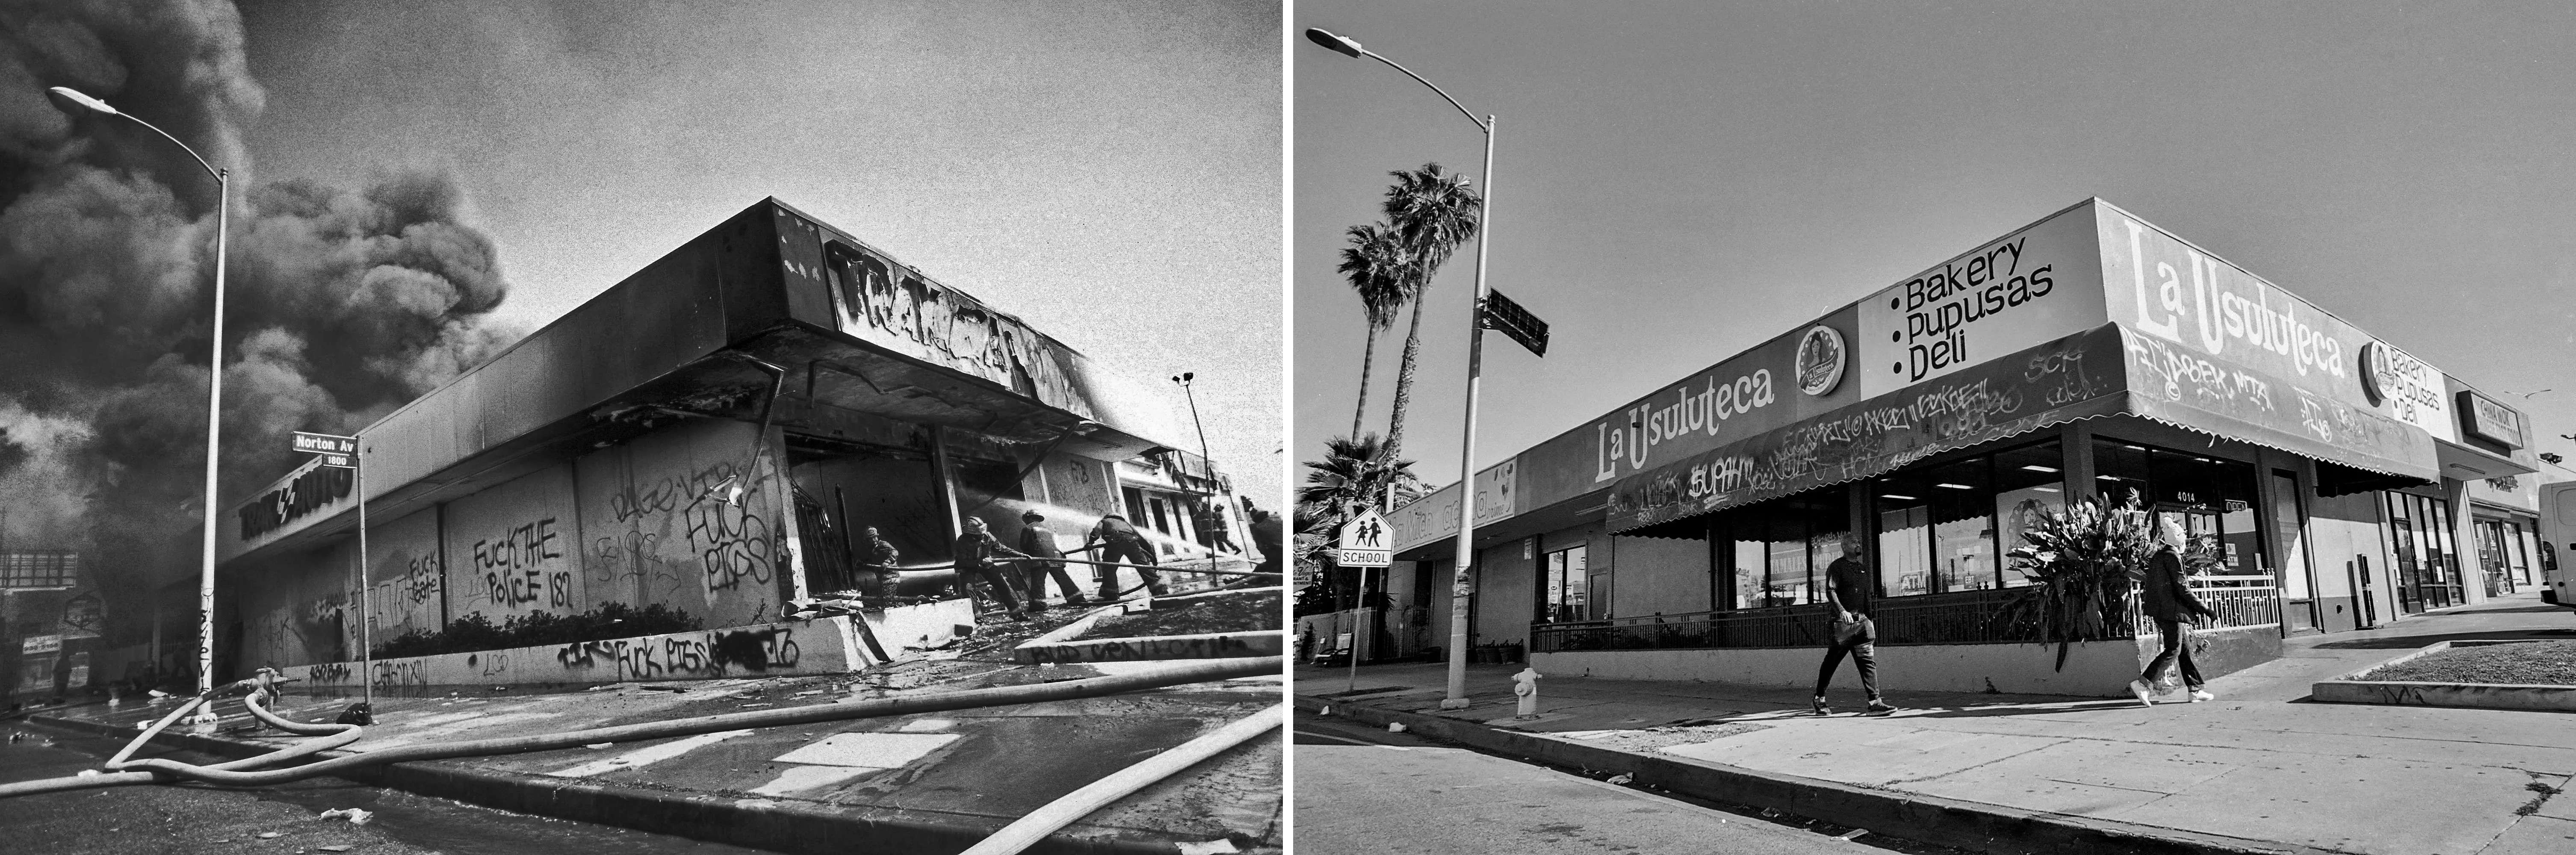 Two pictures are shown side by side: On the left, a shopping center is in flames; on the right, it